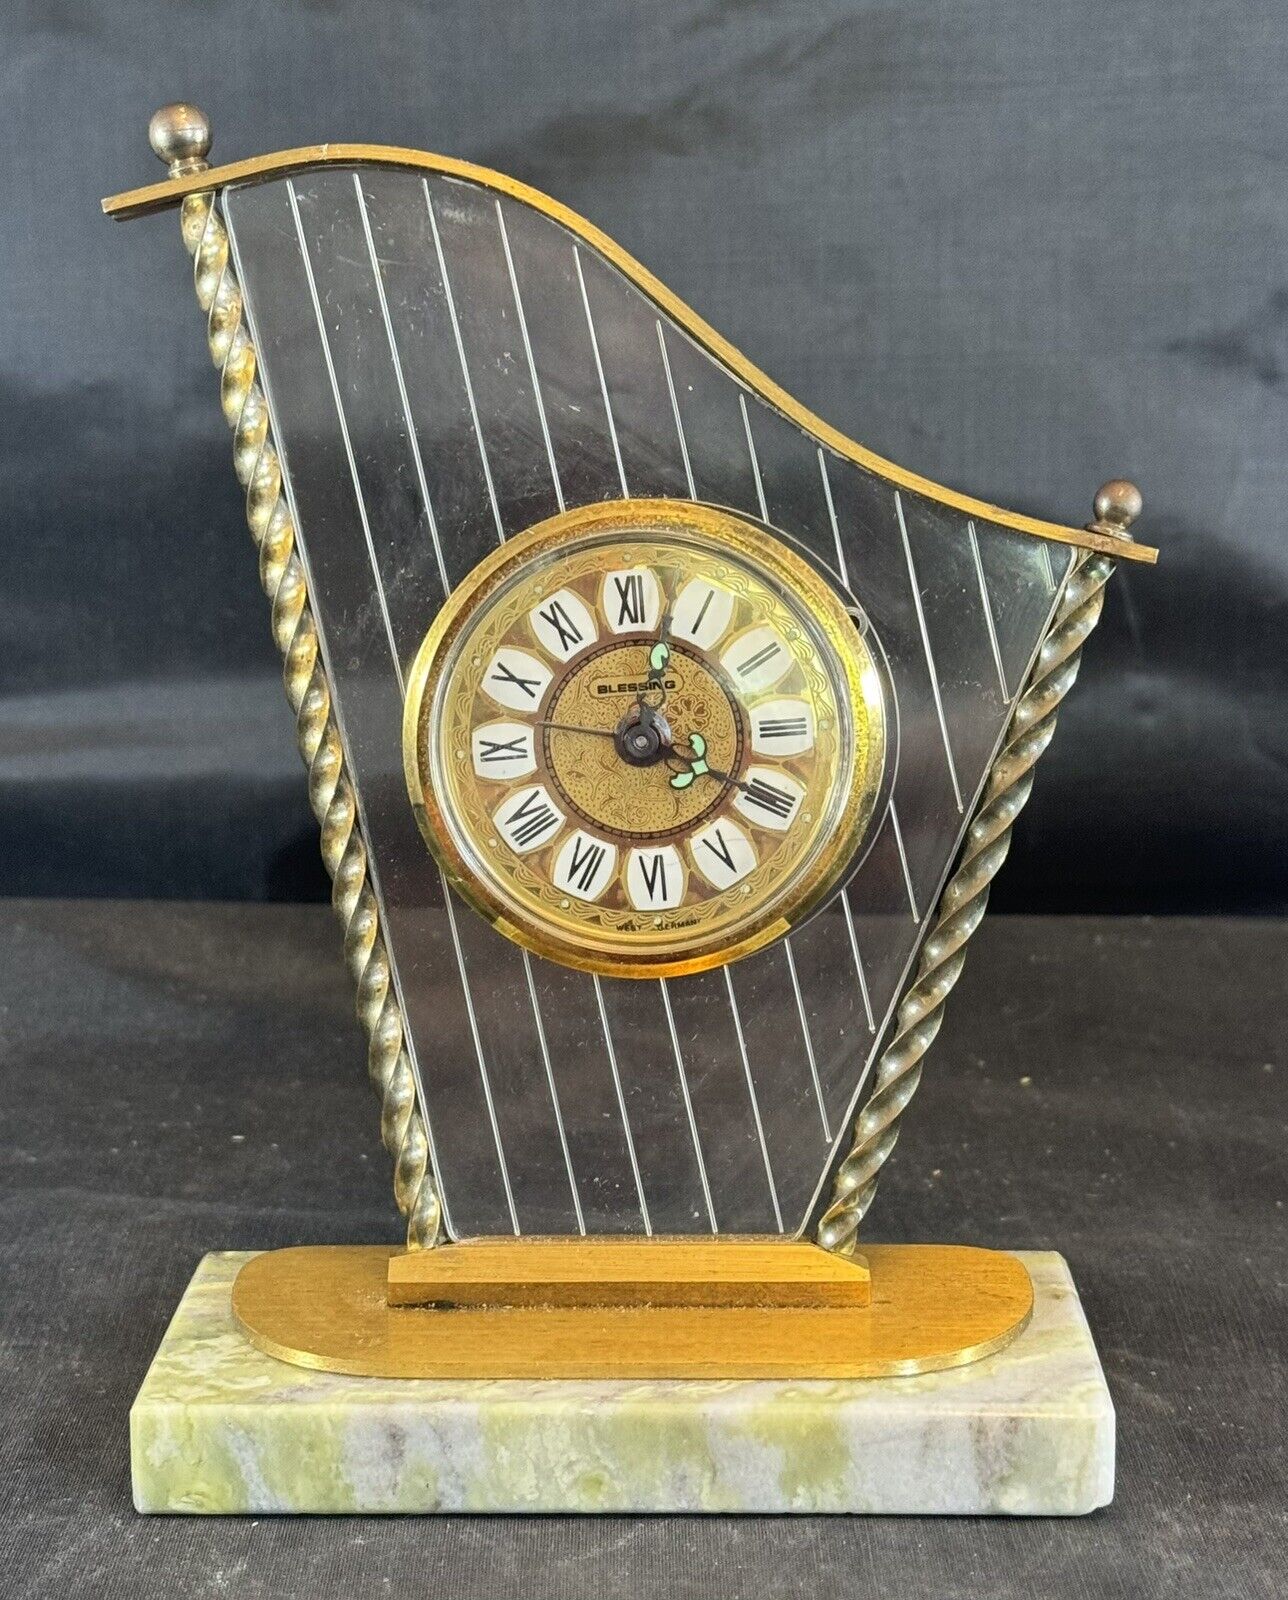 Working Vintage Blessing Harp Shaped Alarm Clock from West Germany (1940s/50s)